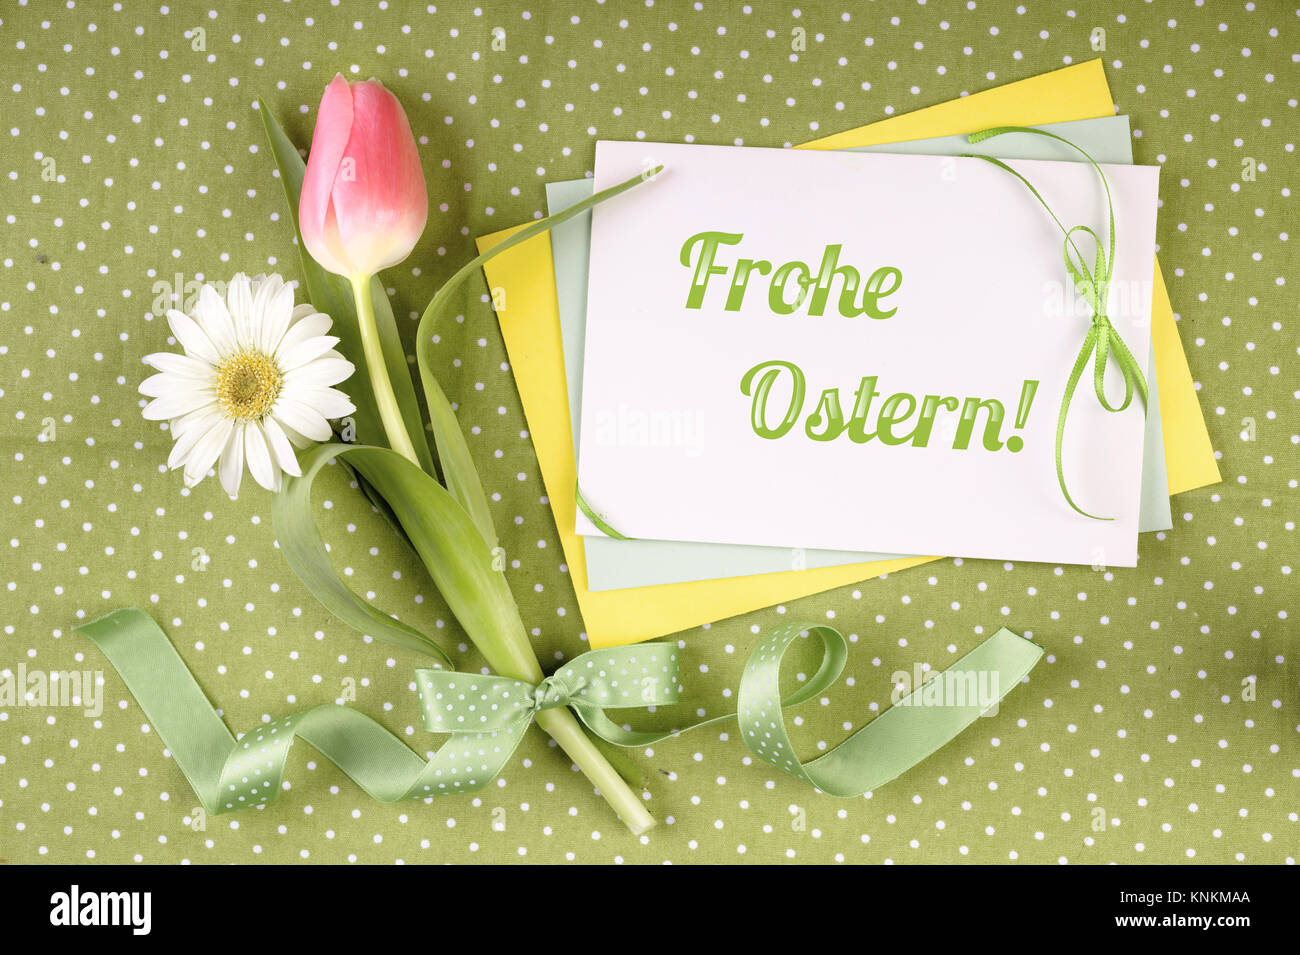 Greeting card with caption 'Frohe Ostern' ('Happy Easter' in  German) with flowers and ribbons Stock Photo